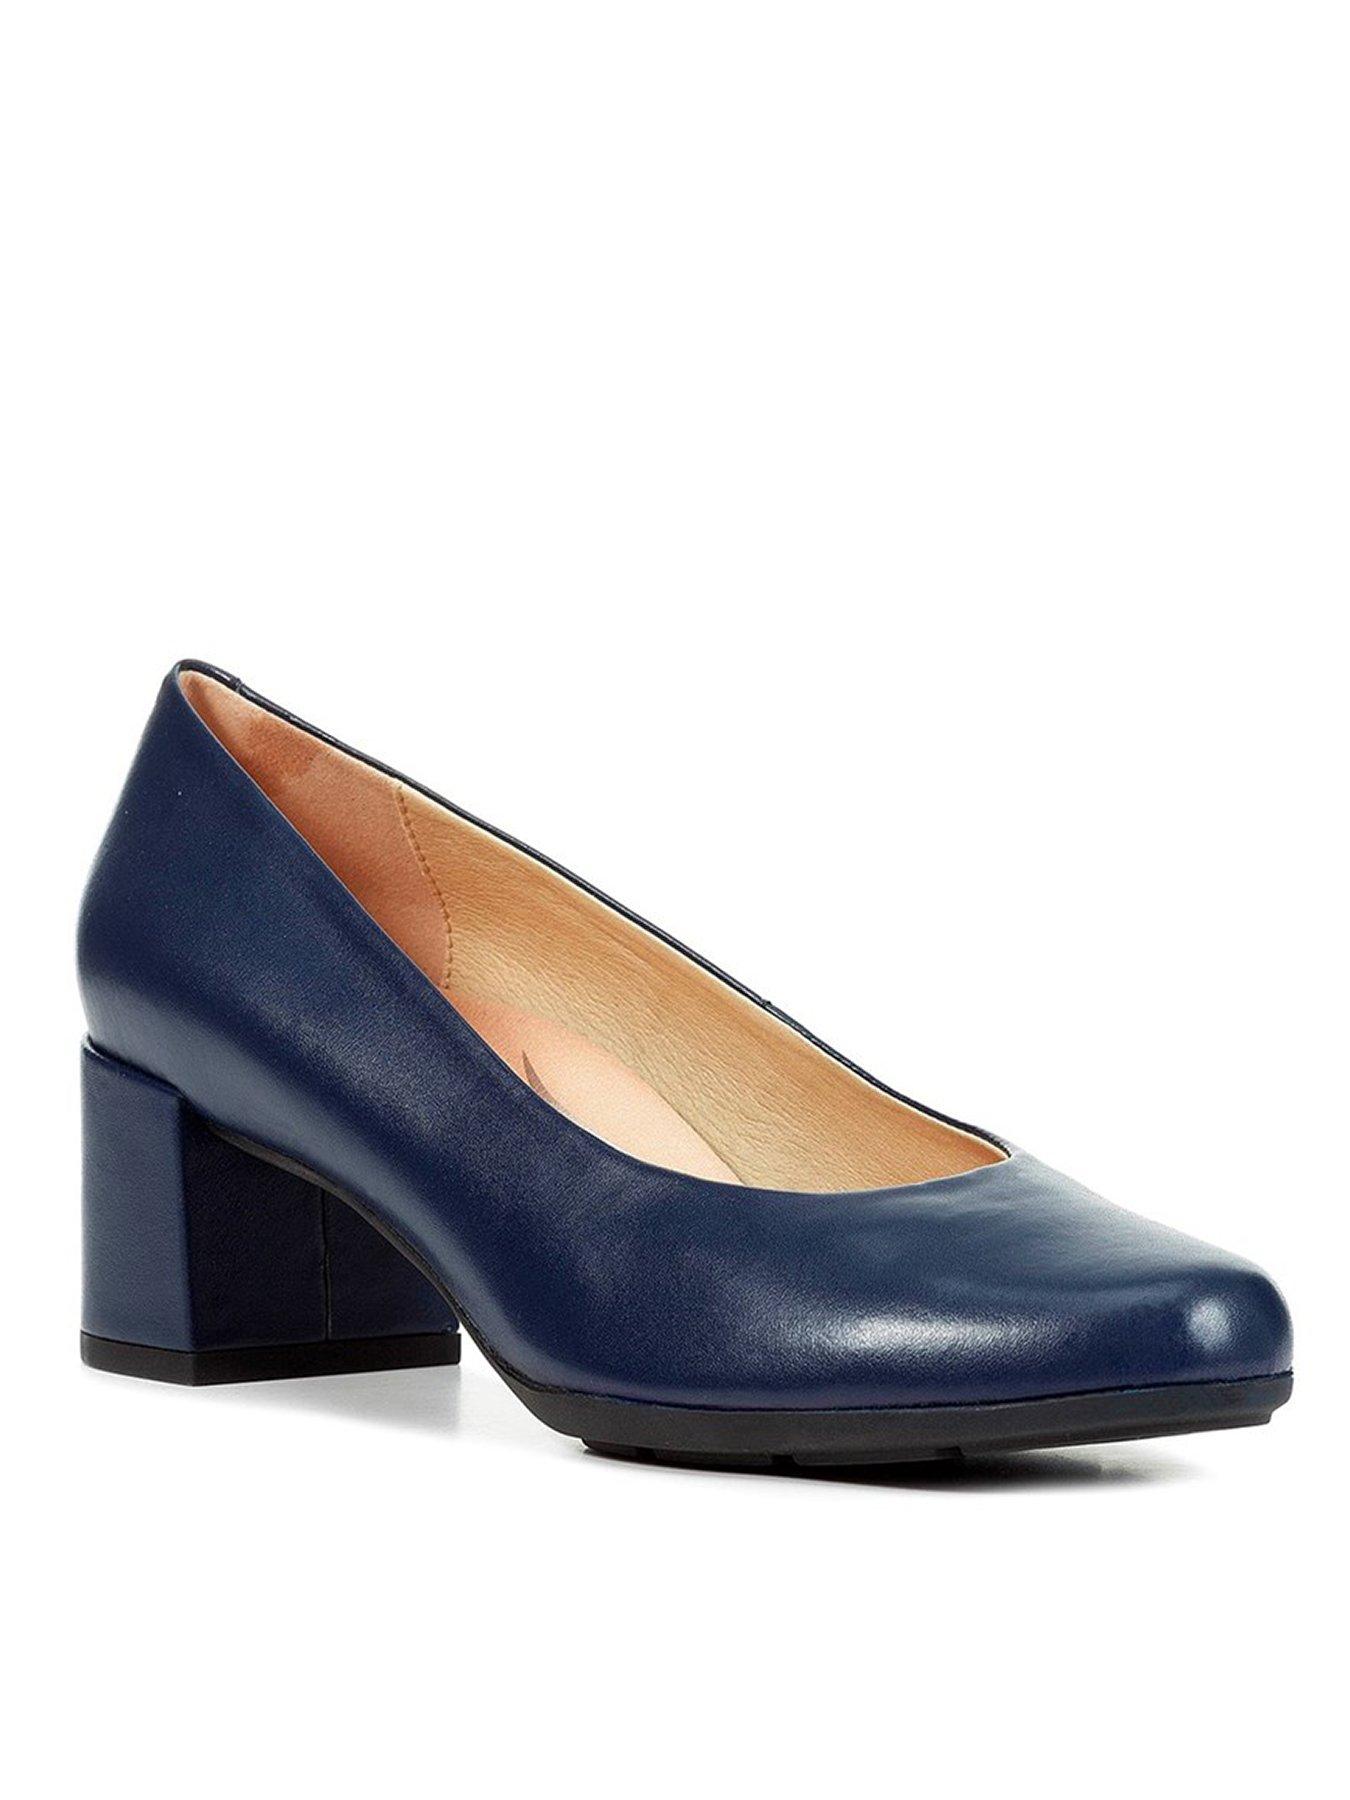  Annya Leather Heeled Court Shoes - Navy